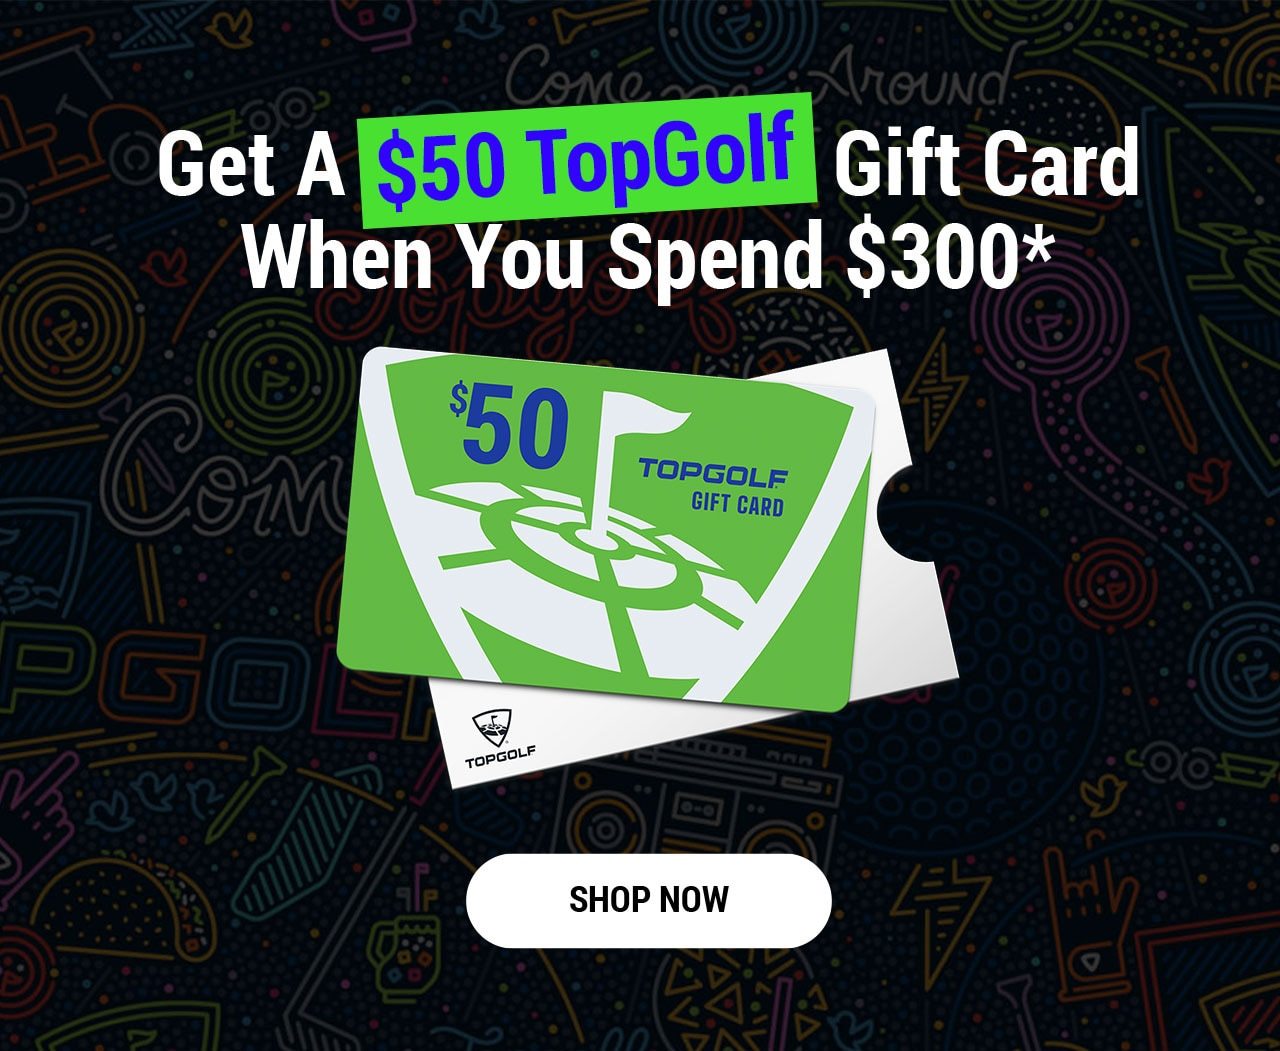 Get A $50 TopGolf Gift Card When You Spend $300* | Shop Now